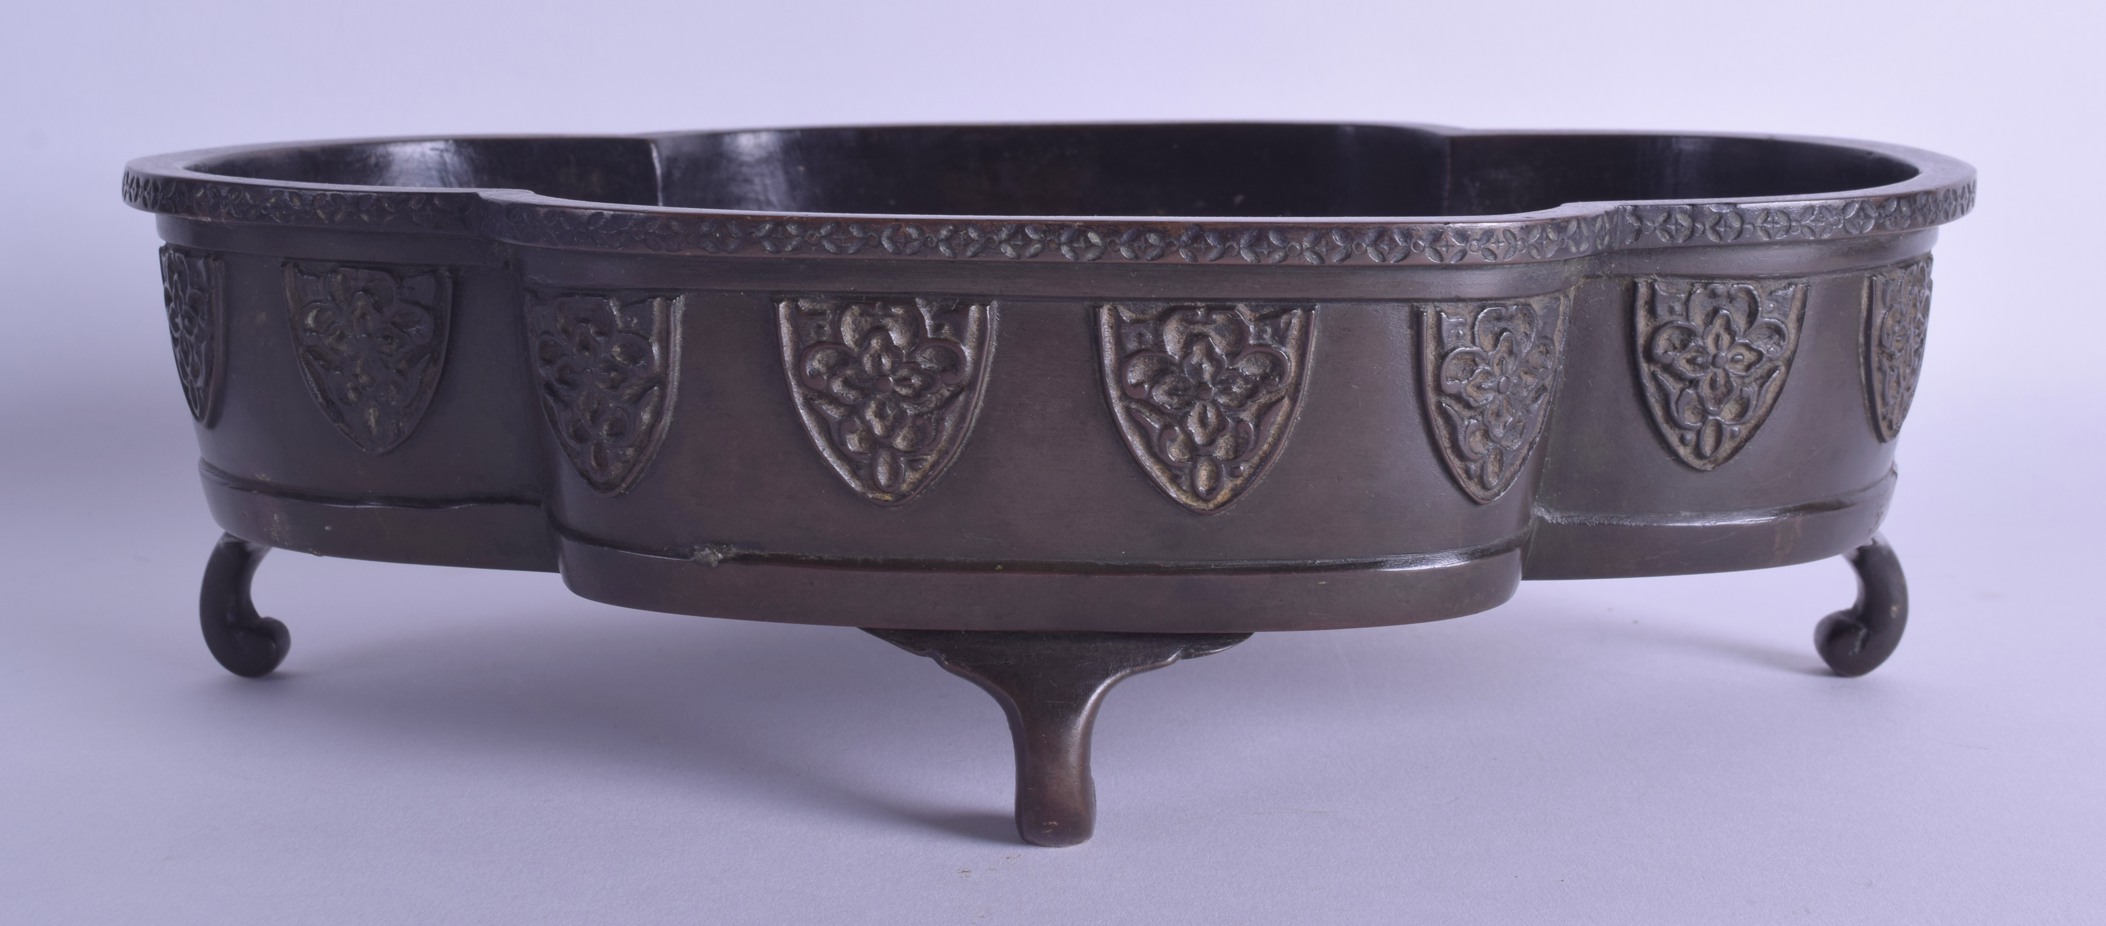 A 19TH CENTURY JAPANESE MEIJI PERIOD BRONZE LOBED CENSER decorated with floral vines. 29 cm x 19.5 - Image 2 of 3